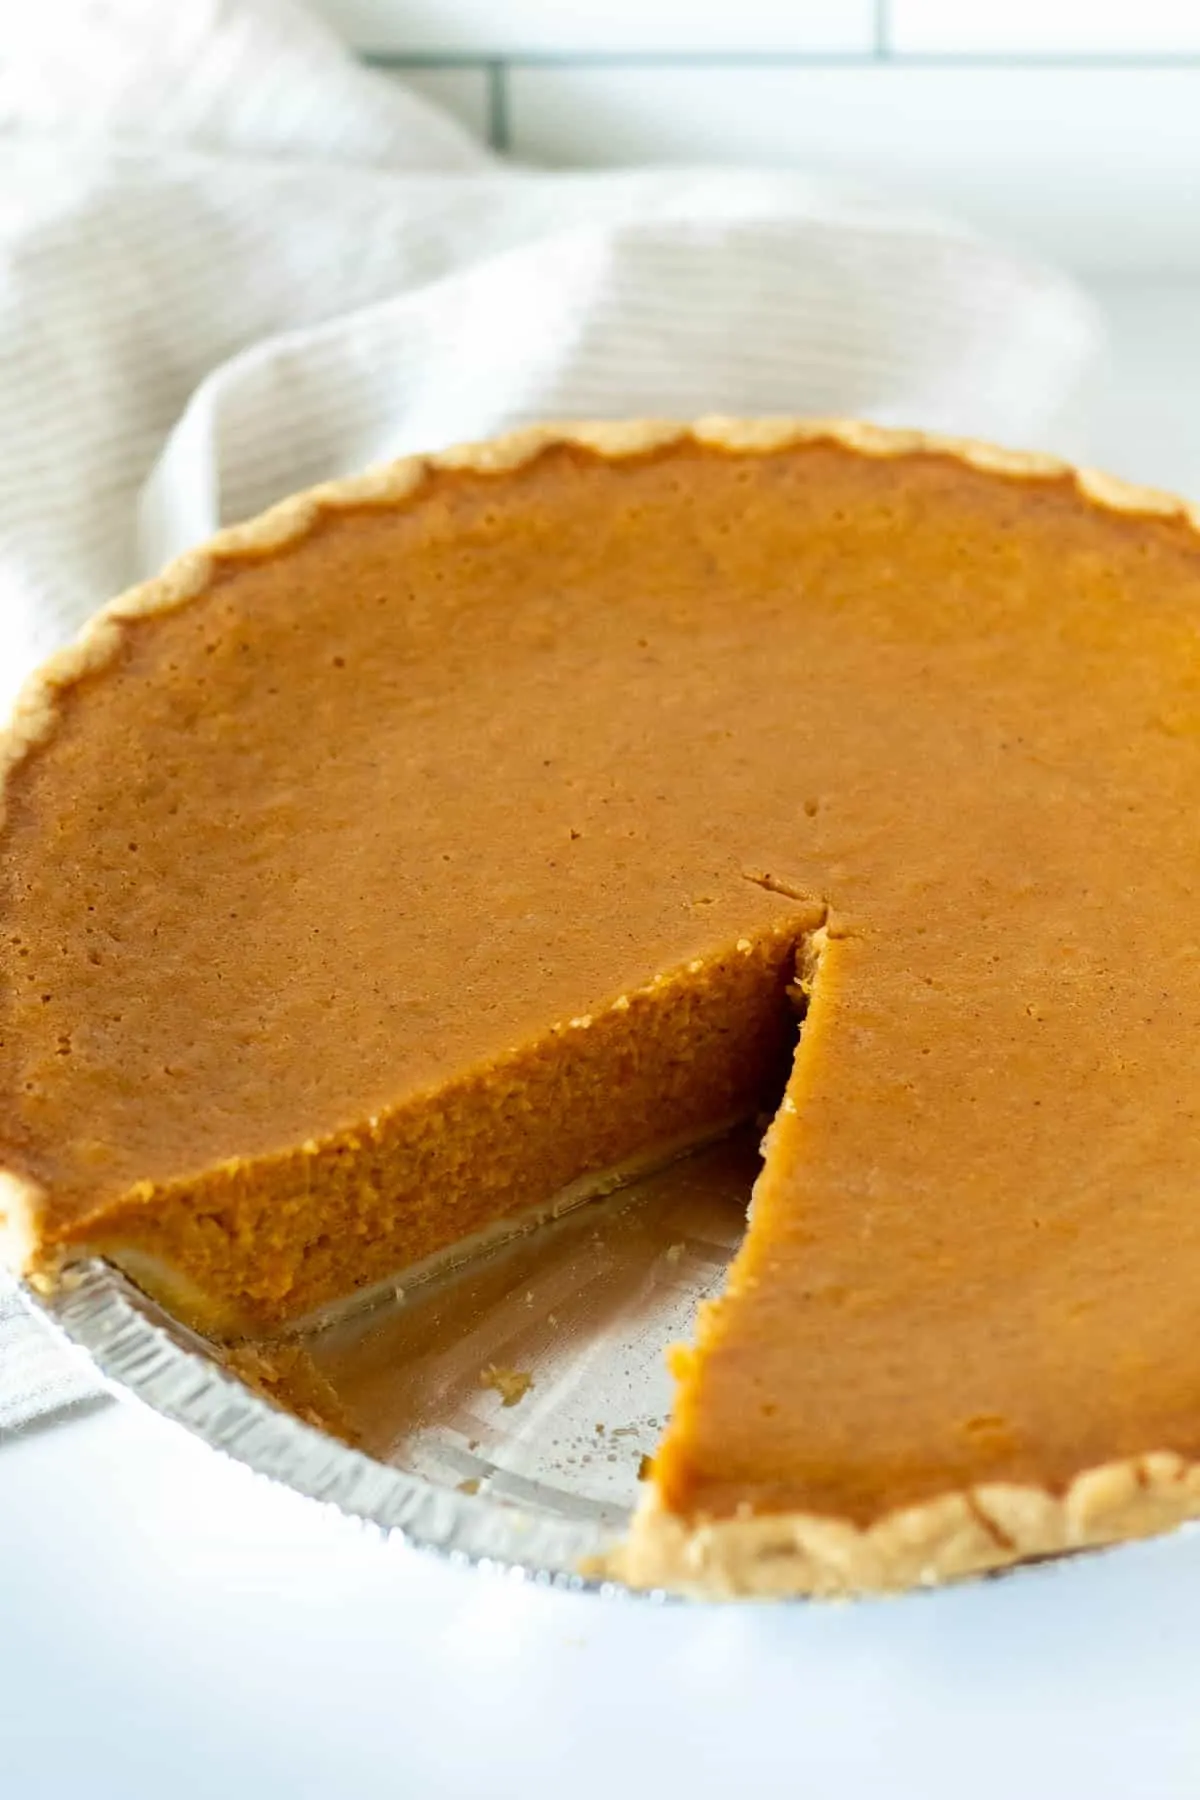 Full sweet potato pie with one piece cut out.